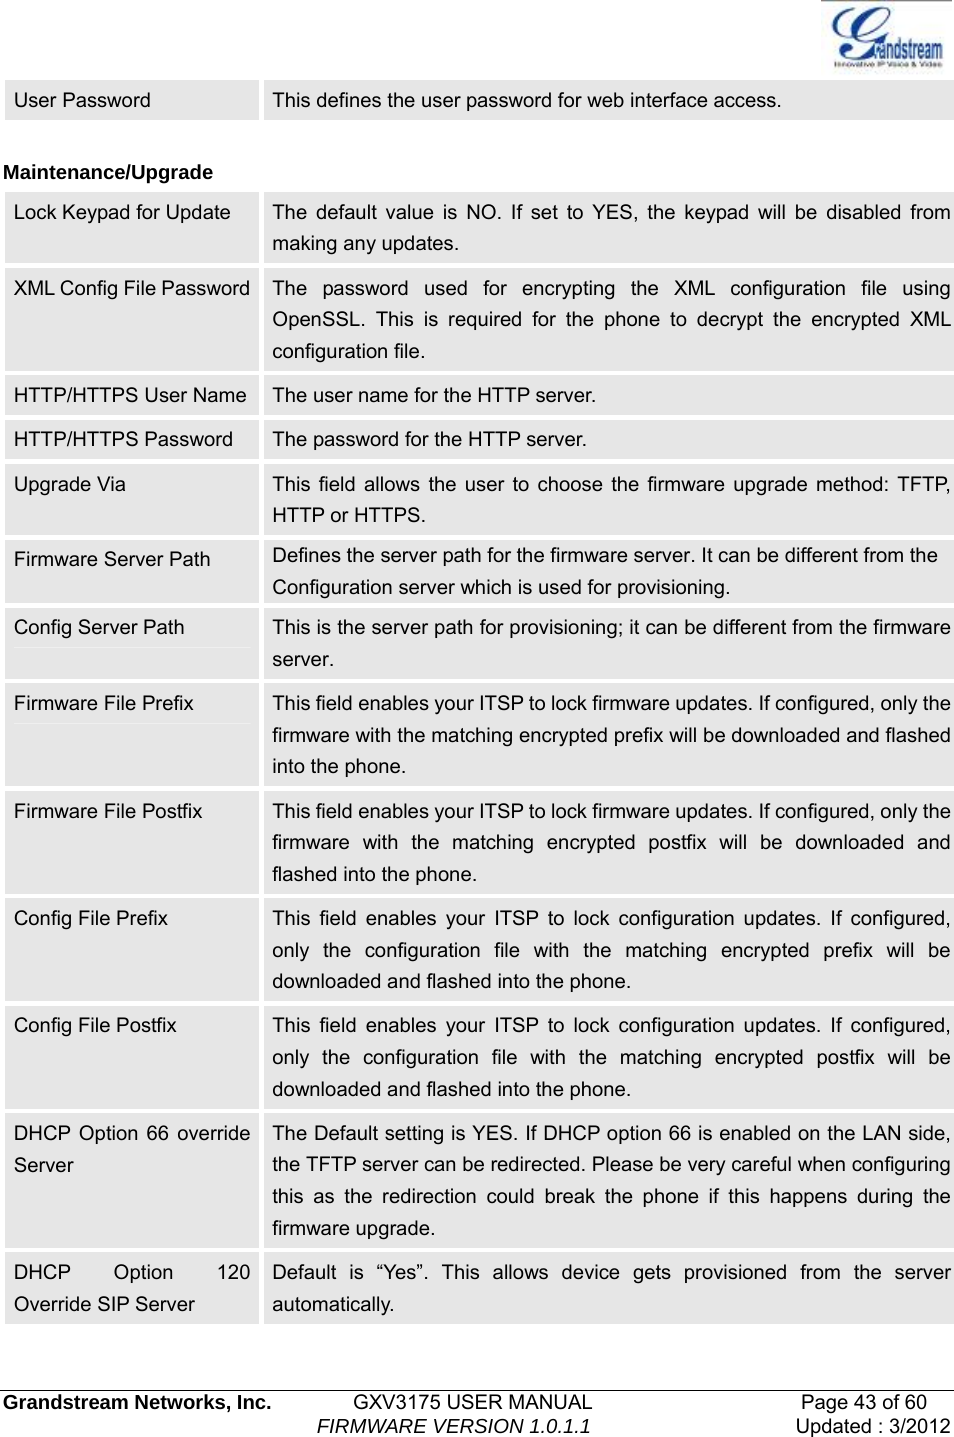   Grandstream Networks, Inc.        GXV3175 USER MANUAL                     Page 43 of 60                                FIRMWARE VERSION 1.0.1.1 Updated : 3/2012  User Password  This defines the user password for web interface access.  Maintenance/Upgrade Lock Keypad for Update  The default value is NO. If set to YES, the keypad will be disabled from making any updates. XML Config File Password  The password used for encrypting the XML configuration file using OpenSSL. This is required for the phone to decrypt the encrypted XML configuration file.   HTTP/HTTPS User Name  The user name for the HTTP server. HTTP/HTTPS Password  The password for the HTTP server. Upgrade Via  This field allows the user to choose the firmware upgrade method: TFTP, HTTP or HTTPS. Firmware Server Path  Defines the server path for the firmware server. It can be different from the Configuration server which is used for provisioning. Config Server Path  This is the server path for provisioning; it can be different from the firmware server. Firmware File Prefix  This field enables your ITSP to lock firmware updates. If configured, only the firmware with the matching encrypted prefix will be downloaded and flashed into the phone. Firmware File Postfix  This field enables your ITSP to lock firmware updates. If configured, only the firmware with the matching encrypted postfix will be downloaded and flashed into the phone. Config File Prefix  This field enables your ITSP to lock configuration updates. If configured, only the configuration file with the matching encrypted prefix will be downloaded and flashed into the phone. Config File Postfix  This field enables your ITSP to lock configuration updates. If configured, only the configuration file with the matching encrypted postfix will be downloaded and flashed into the phone. DHCP Option 66 override Server The Default setting is YES. If DHCP option 66 is enabled on the LAN side, the TFTP server can be redirected. Please be very careful when configuring this as the redirection could break the phone if this happens during the firmware upgrade. DHCP Option 120 Override SIP Server Default is “Yes”. This allows device gets provisioned from the server automatically. 